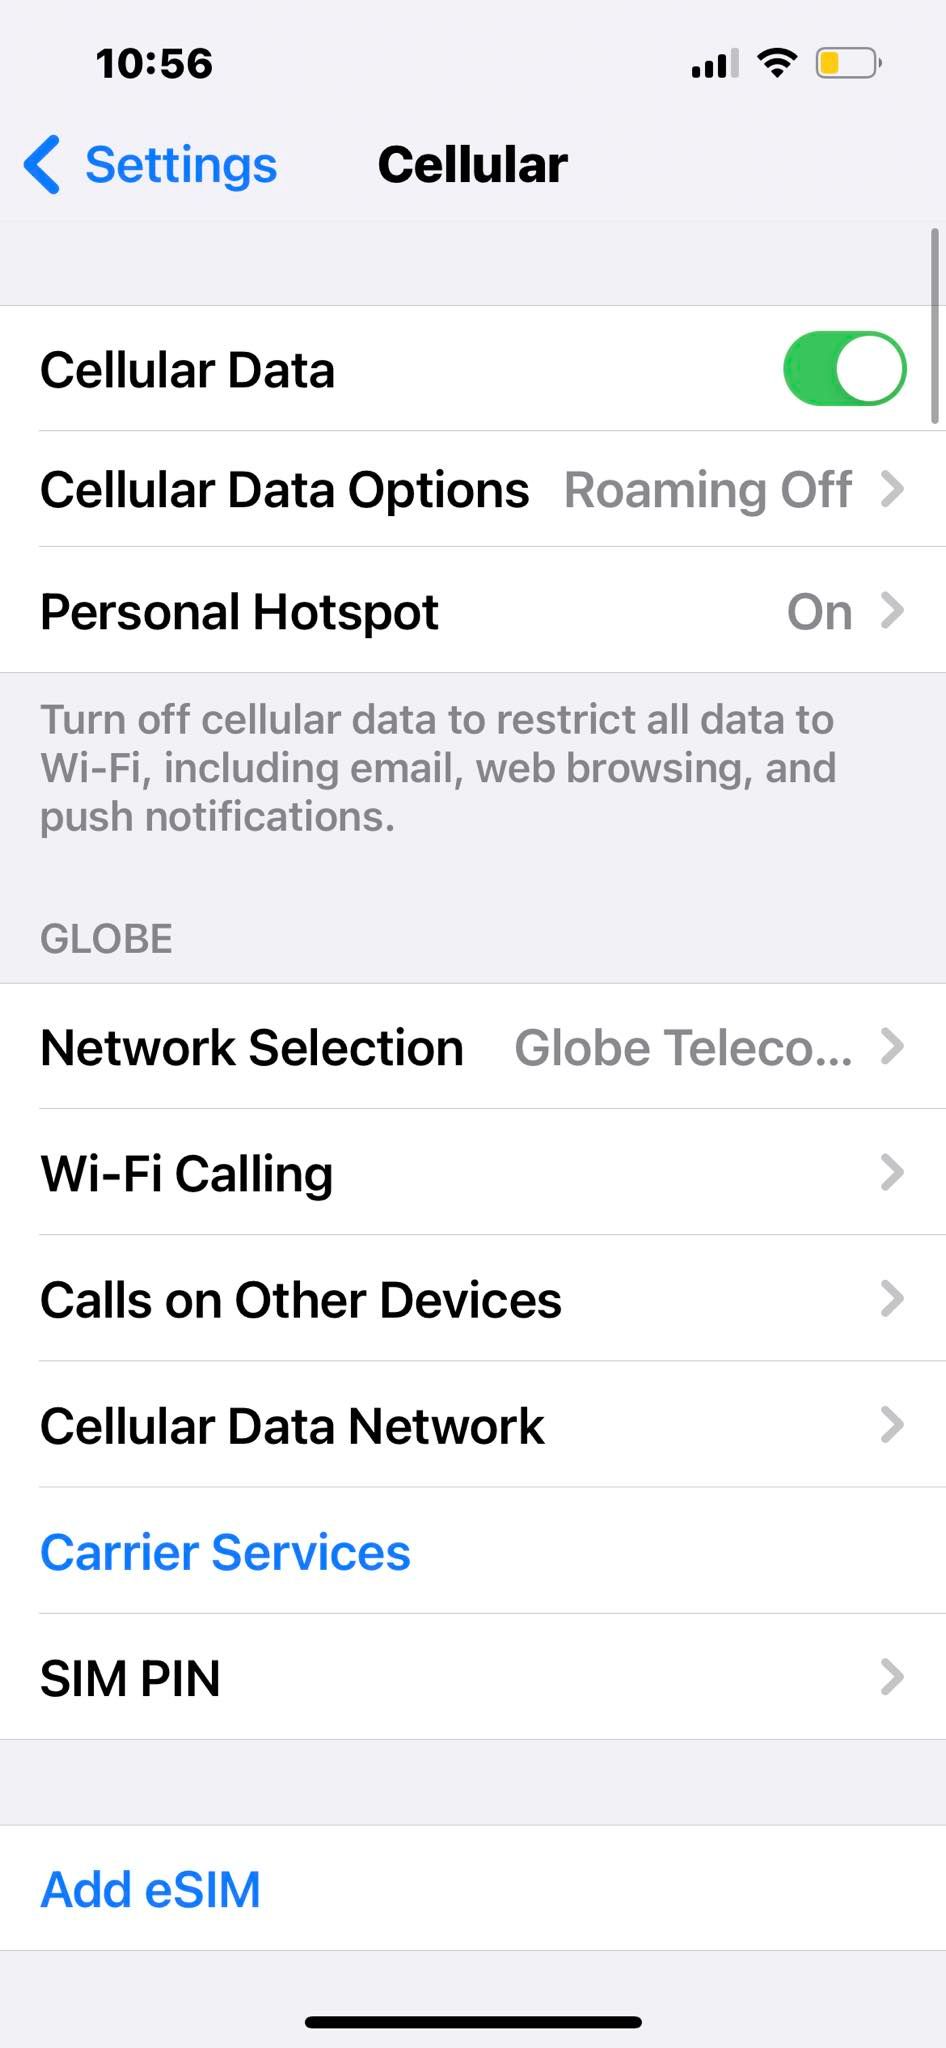 The Cellular Device Settings in iOS 